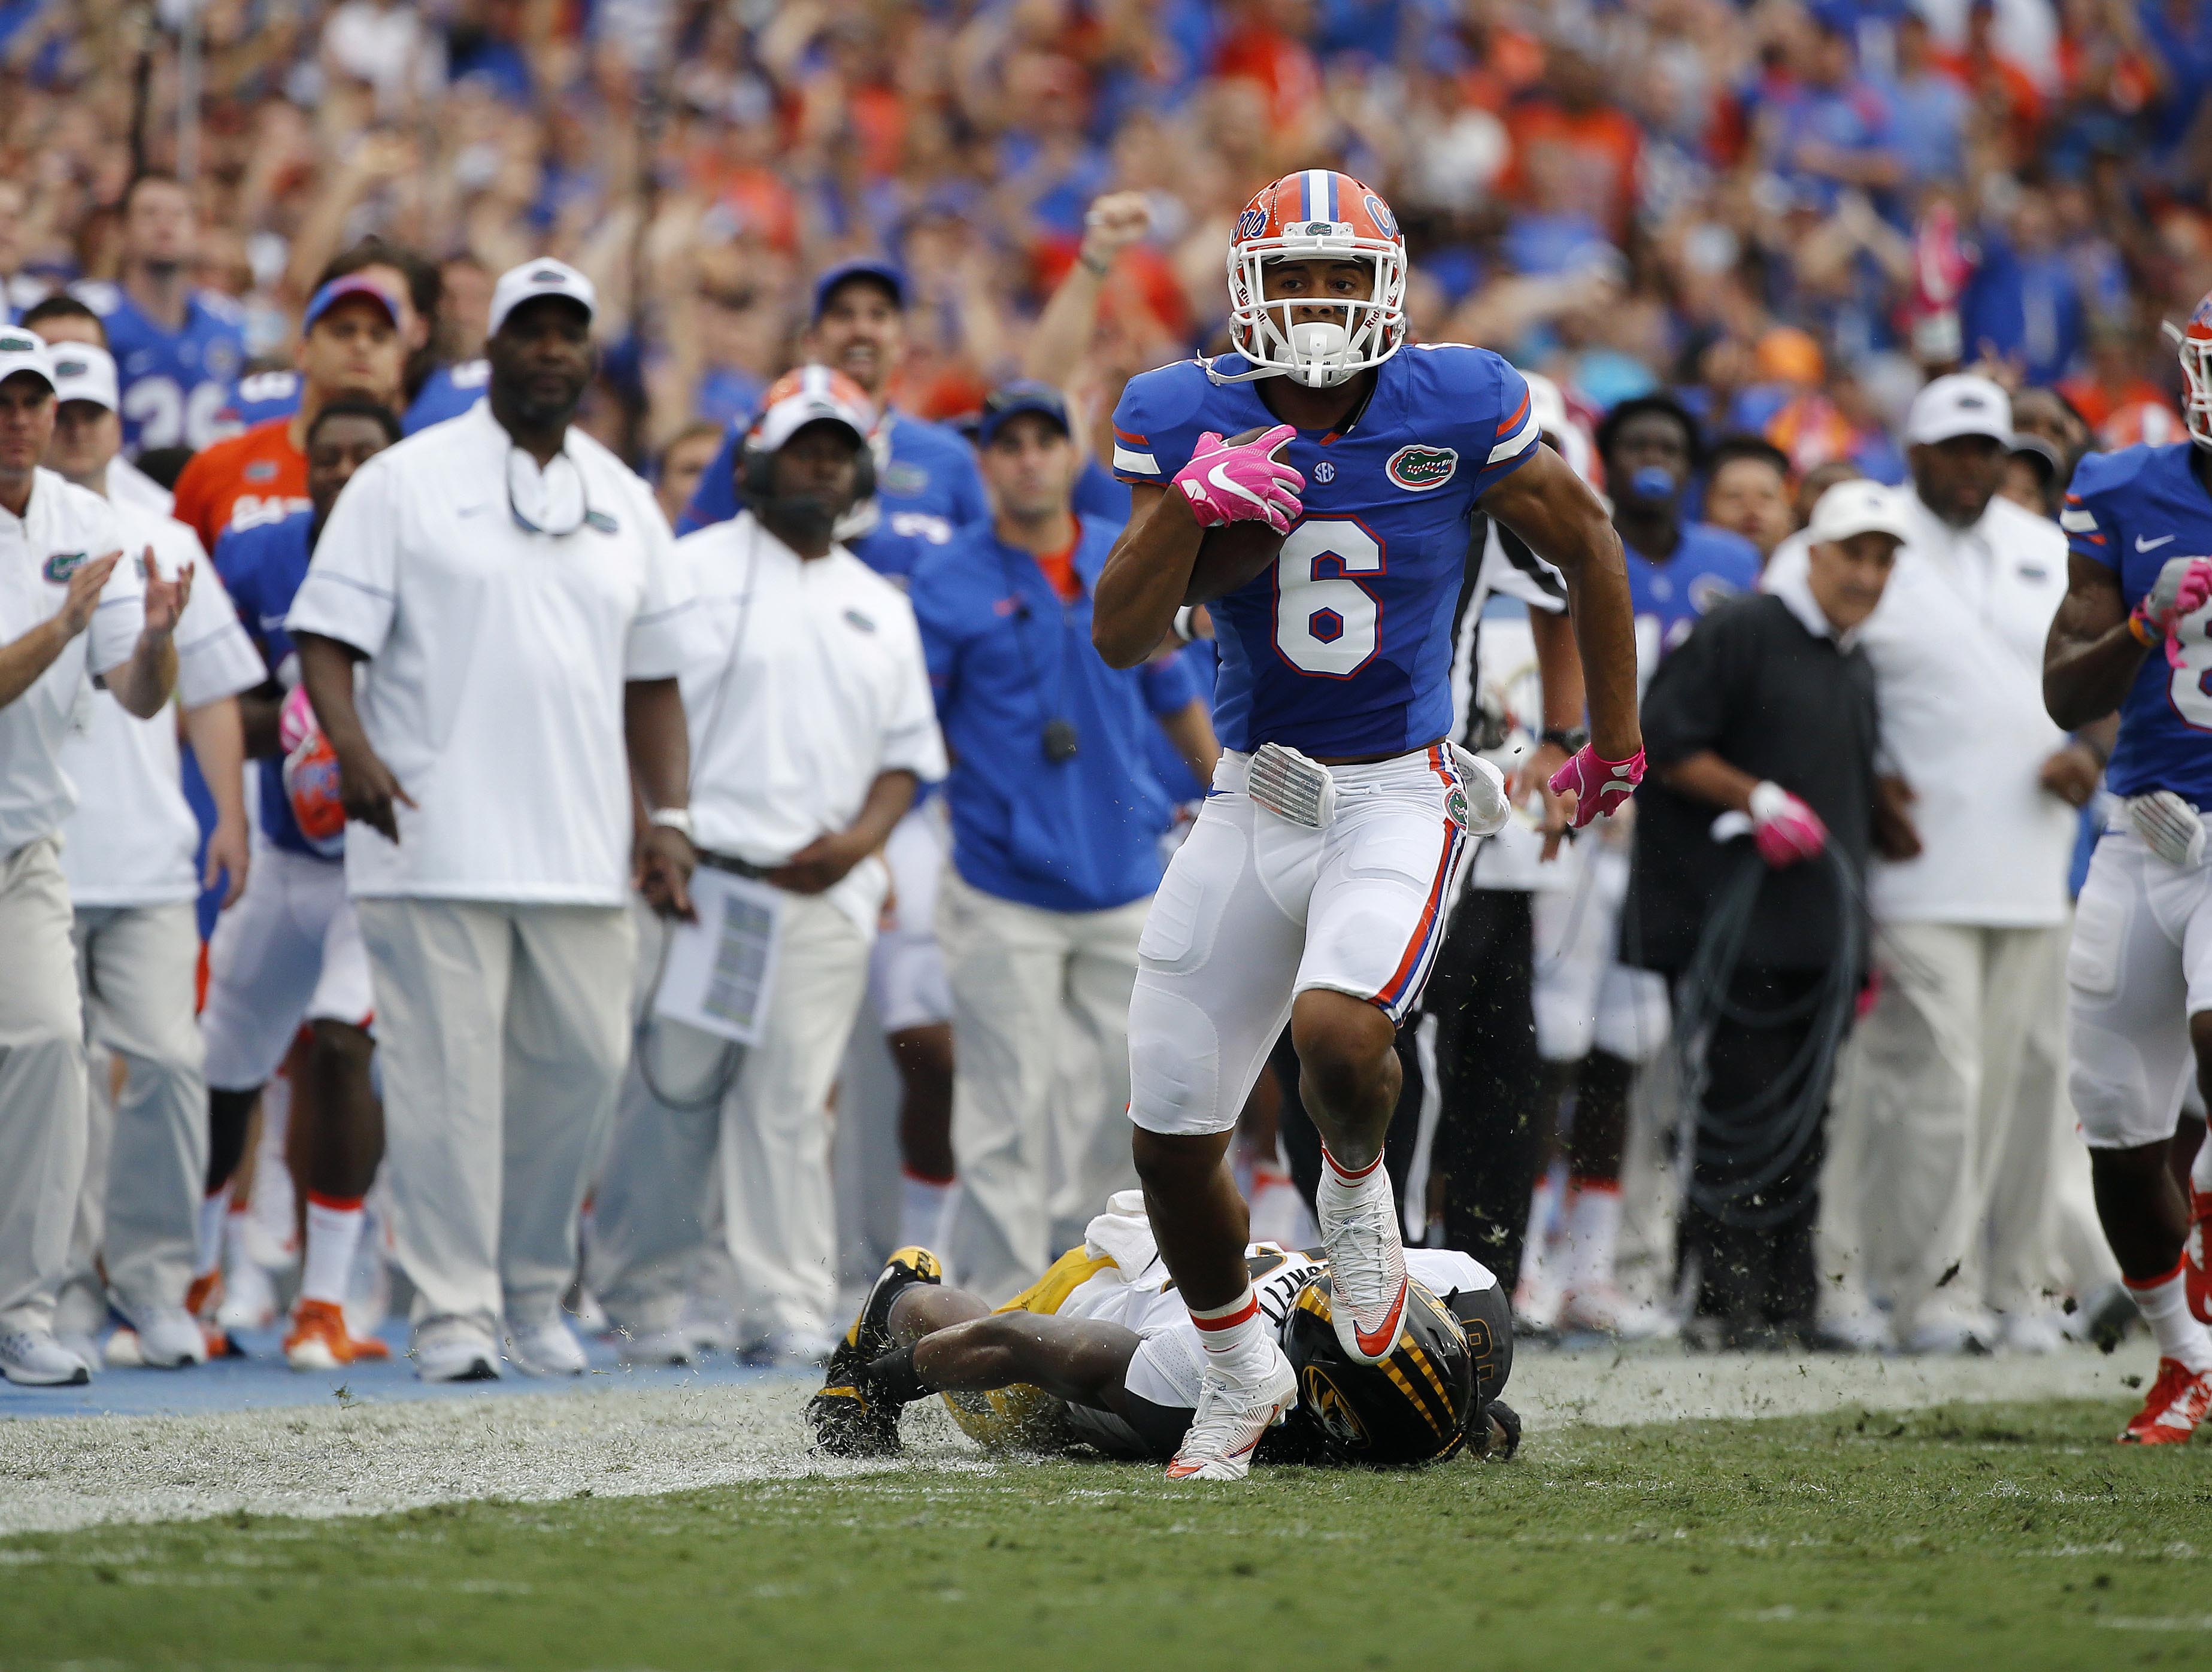 Oct 15, 2016; Gainesville, FL, USA; Florida Gators defensive back Quincy Wilson (6) intercepted the ball and ran it back for a touchdown against the Missouri Tigers eduring the second quarter at Ben Hill Griffin Stadium. Mandatory Credit: Kim Klement-USA TODAY Sports